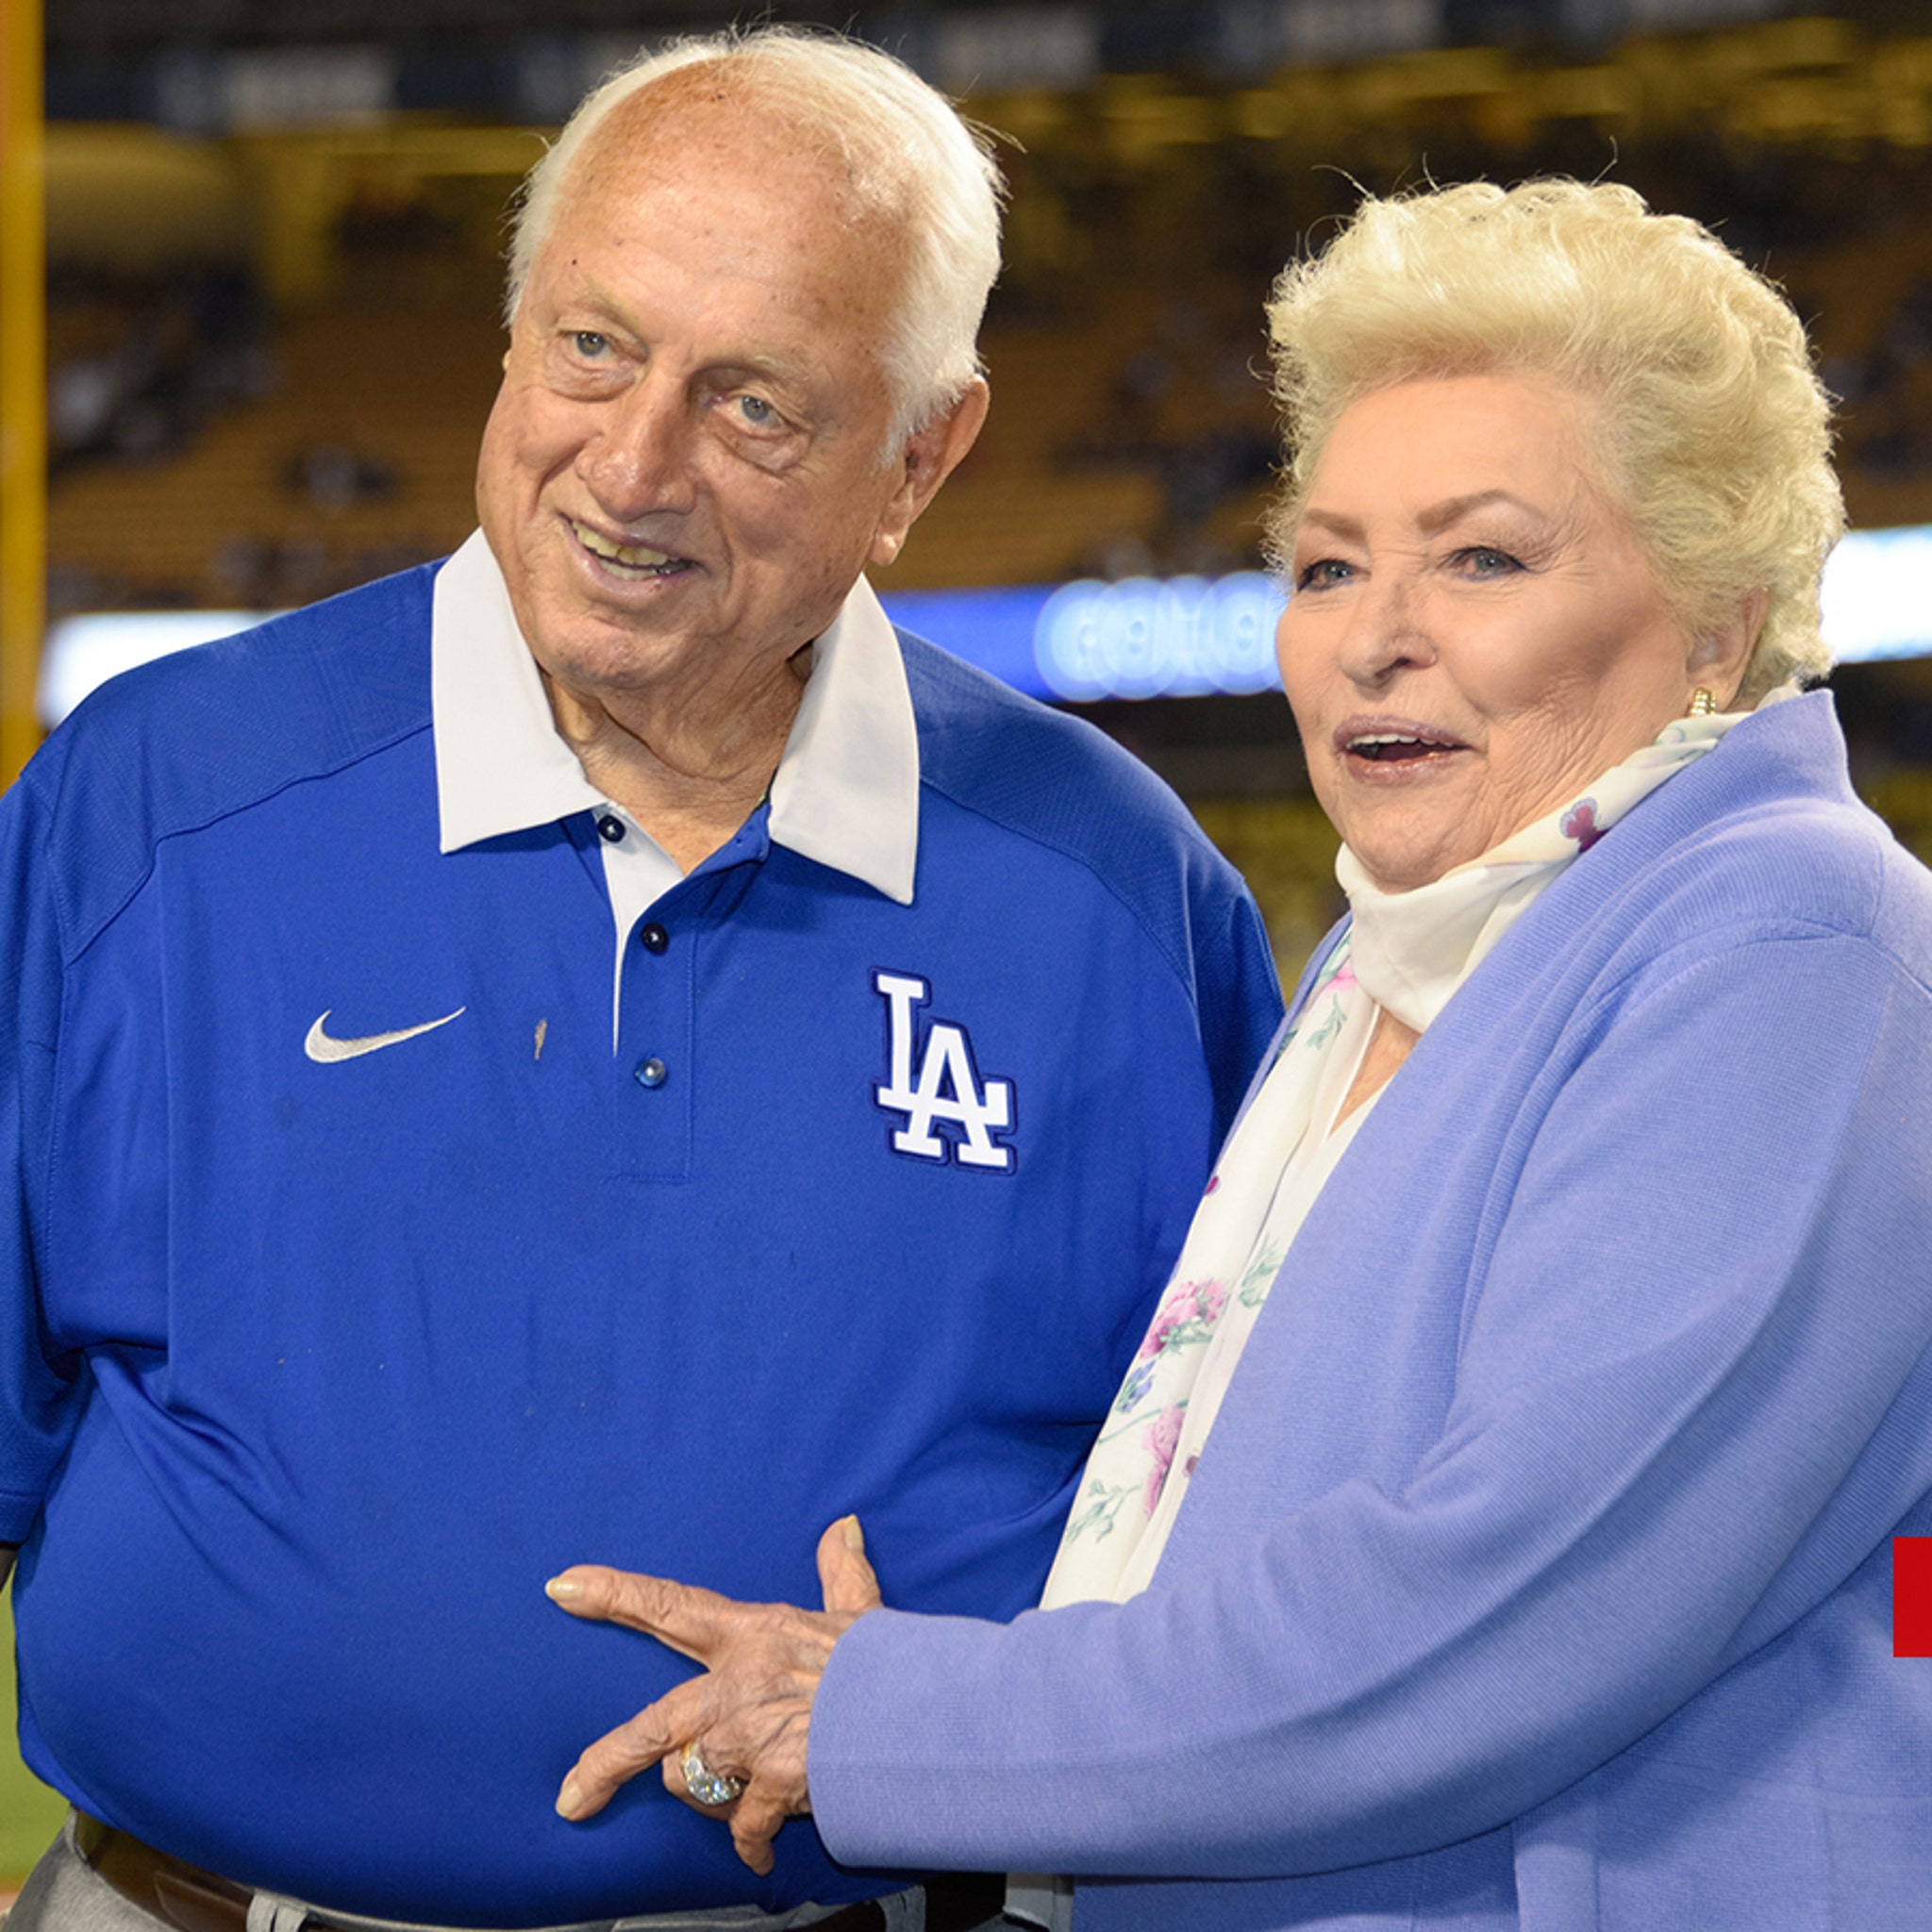 Jo Lasorda, widow of former Dodgers manager, dies at 91